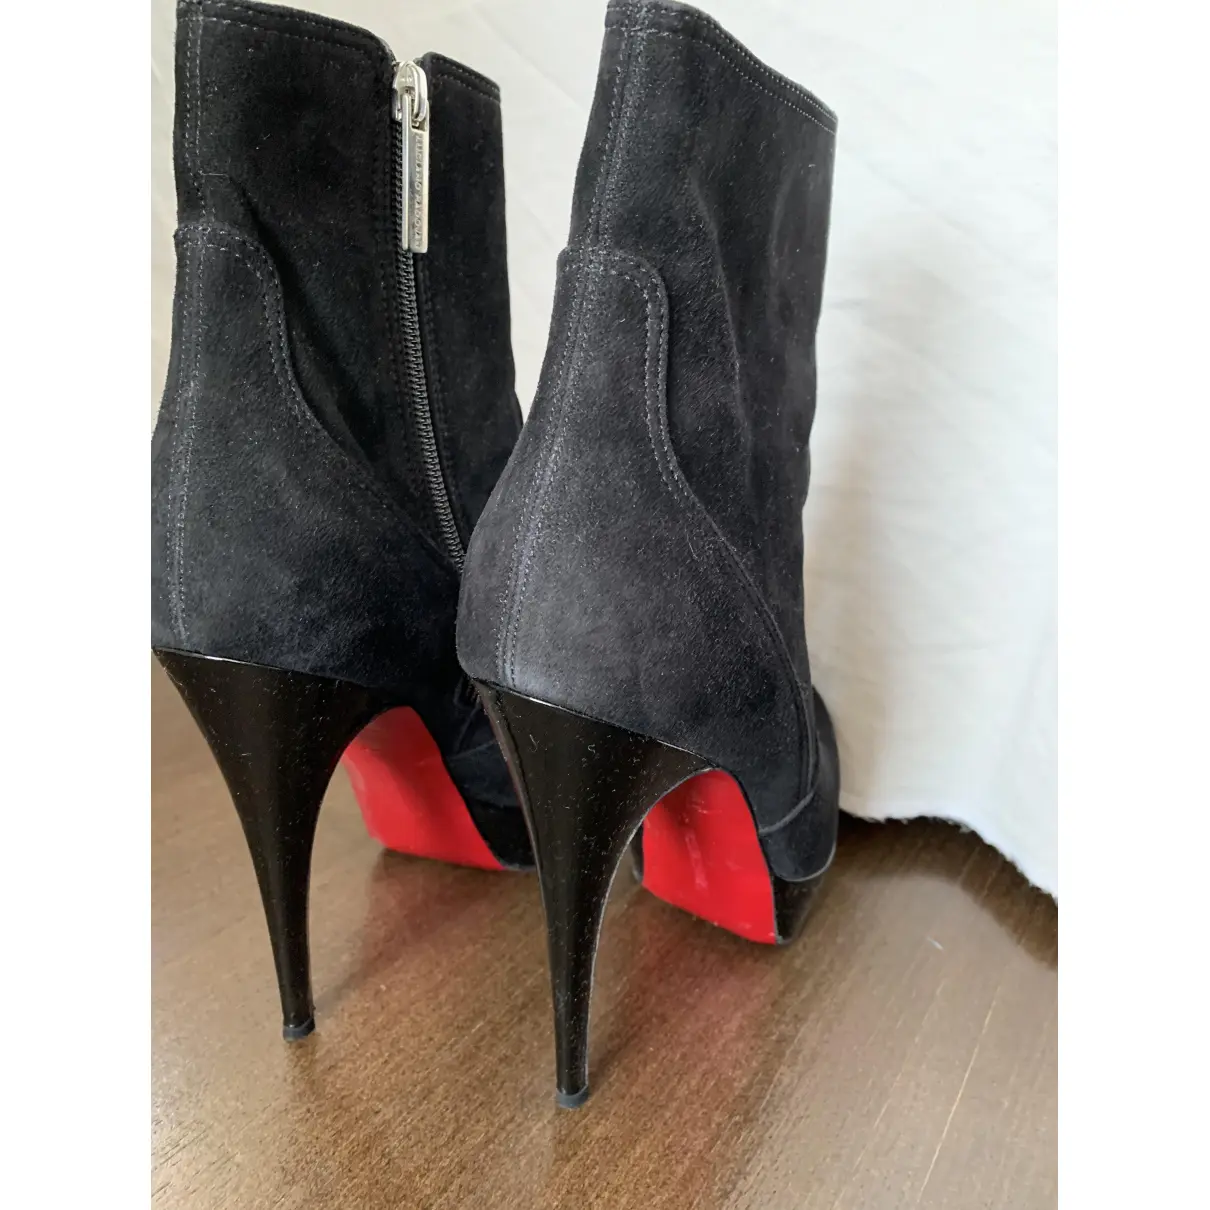 Buy Luciano Padovan Ankle boots online